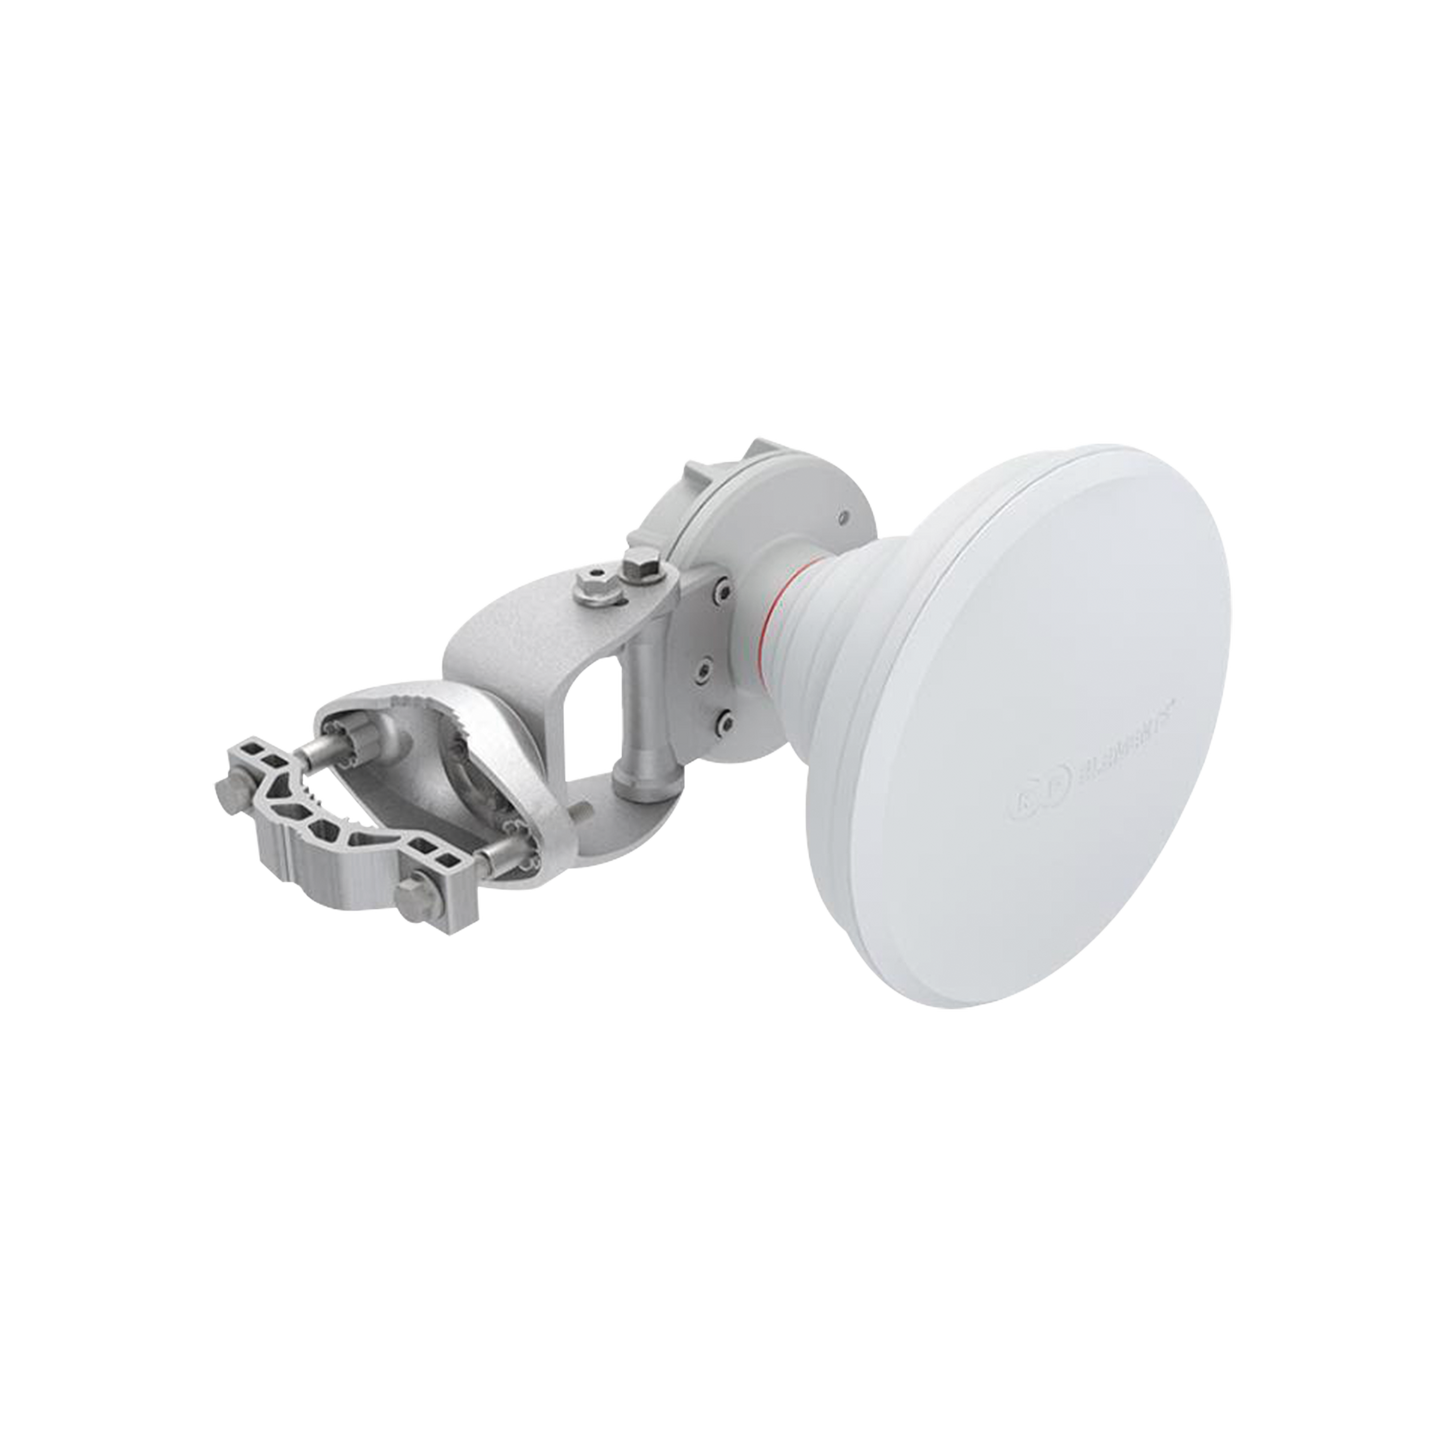 Symmetrical Horn TP Antenna GEN2 of 40º, 5180-6400 MHz, 16.2 dBi with Improved Support, Ready for TwisPort without Loss